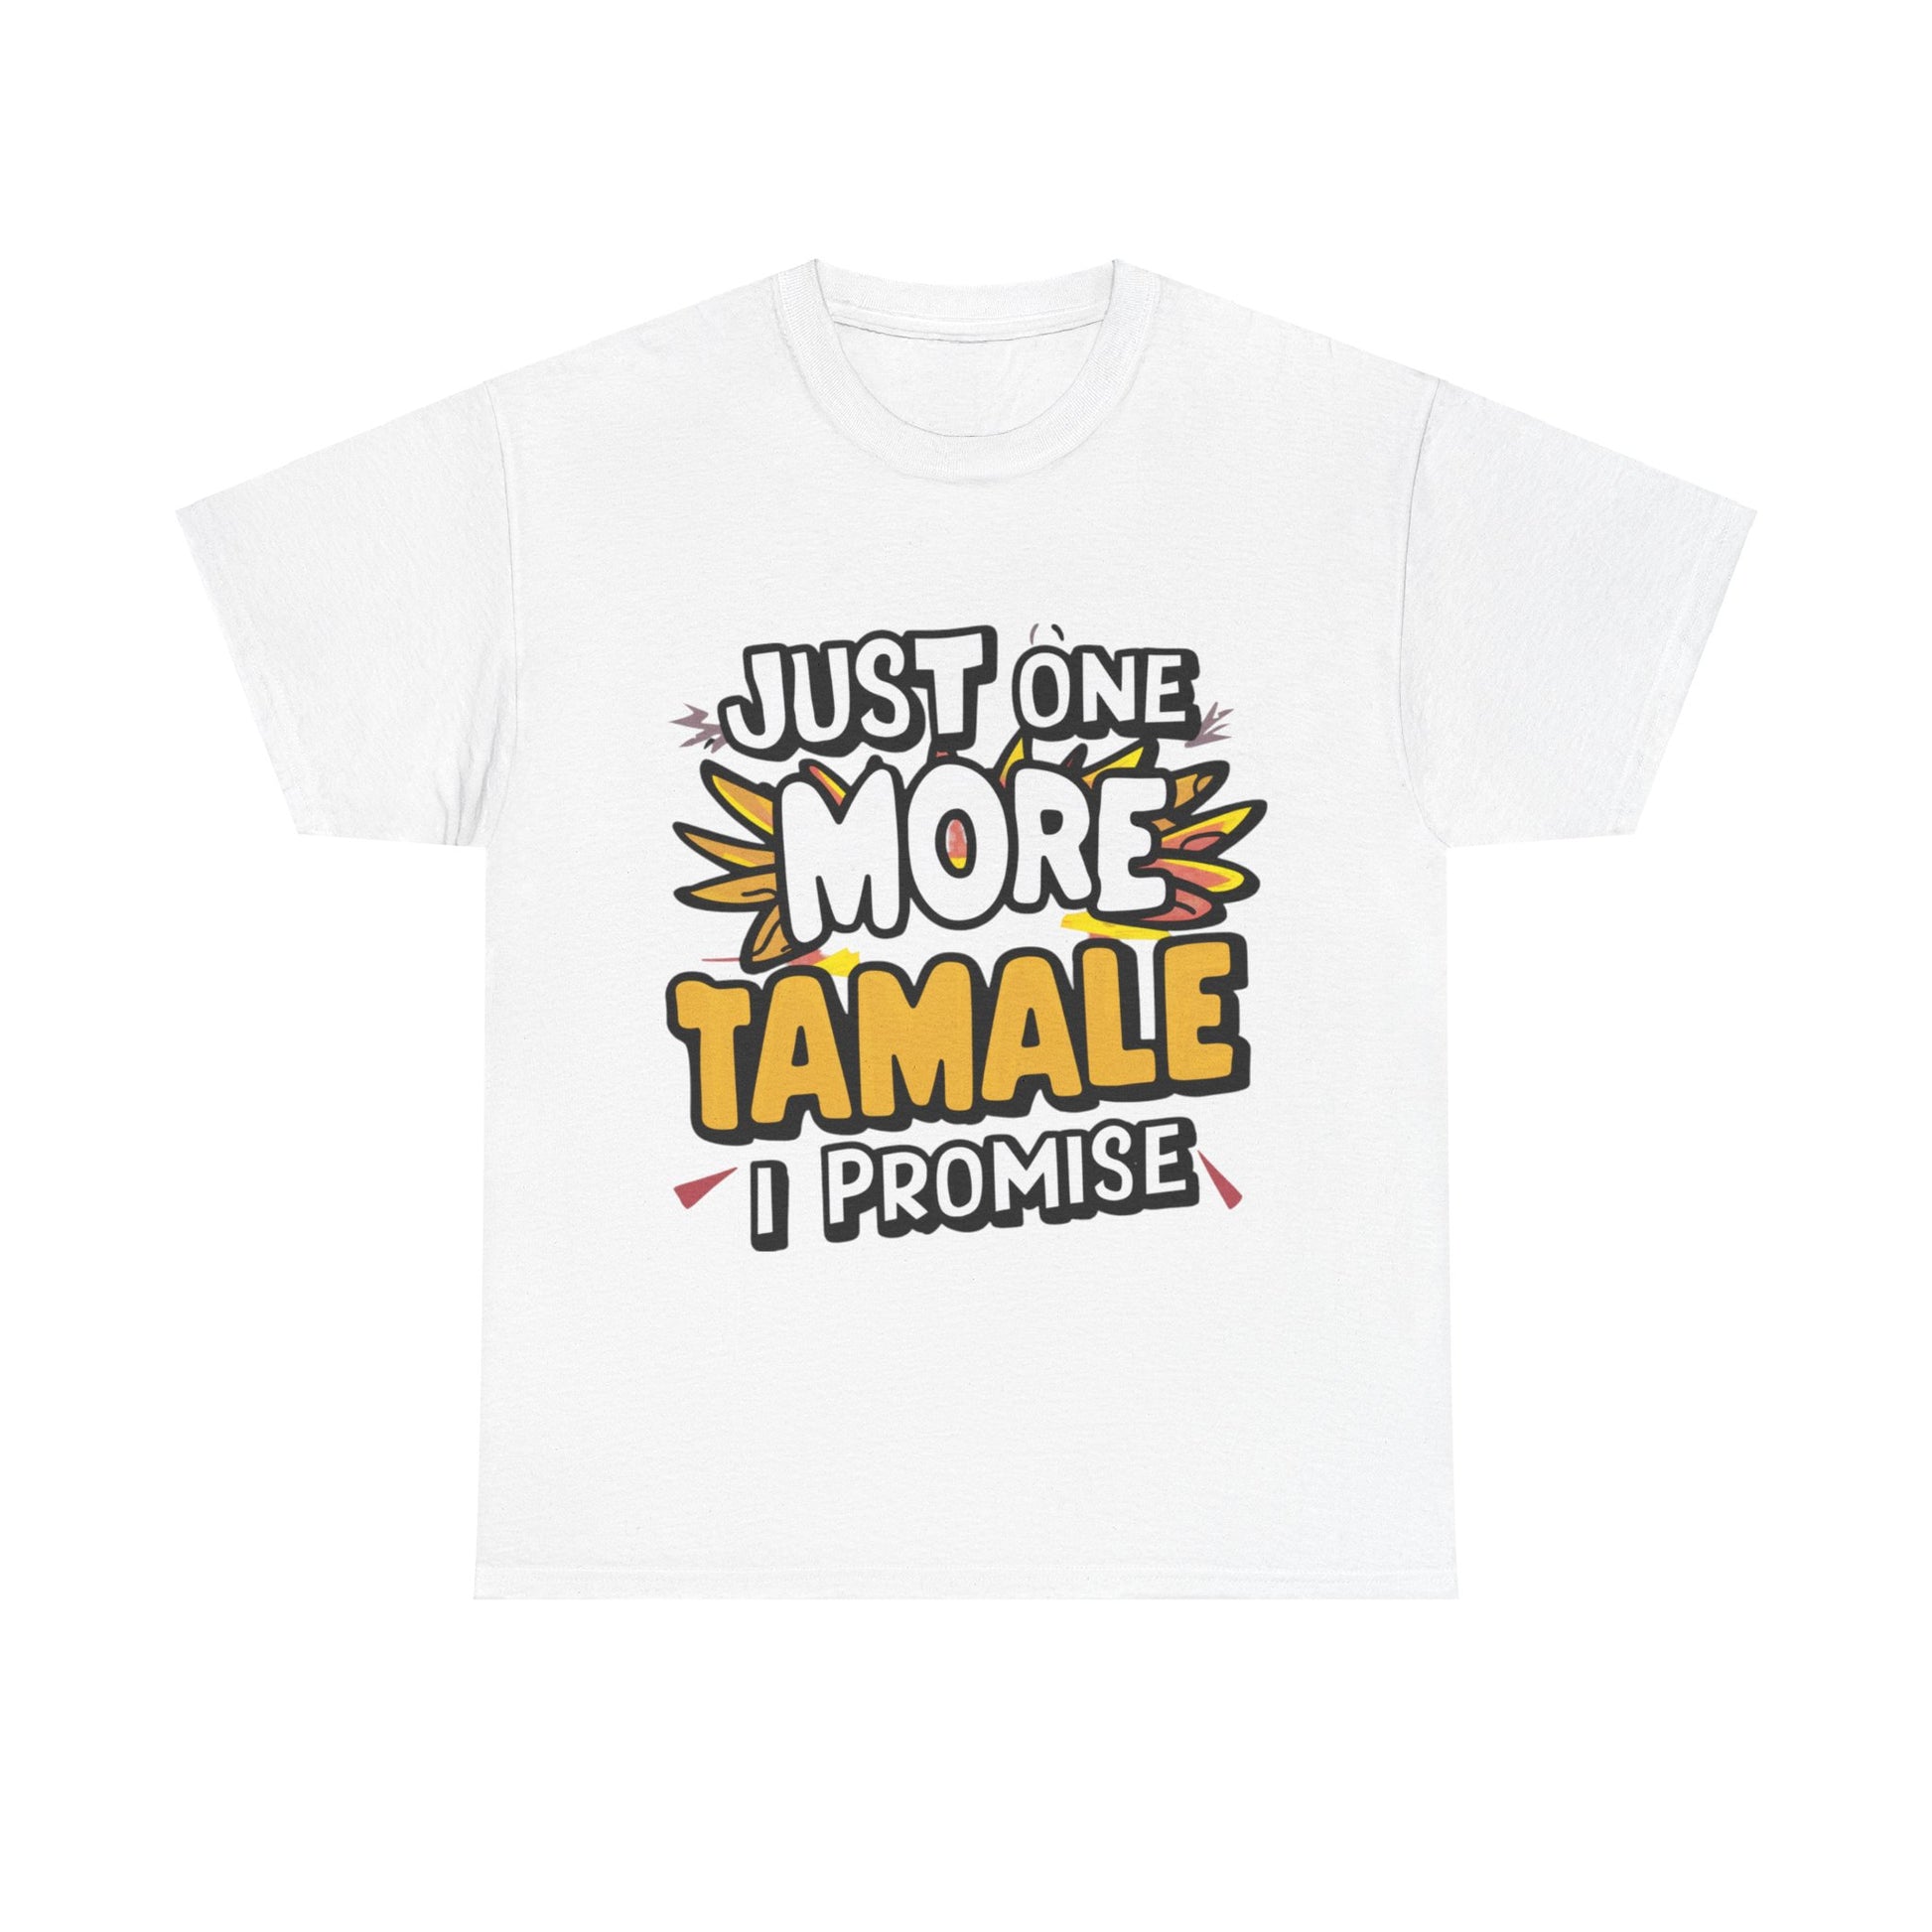 Just One More Tamale I Promise Mexican Food Graphic Unisex Heavy Cotton Tee Cotton Funny Humorous Graphic Soft Premium Unisex Men Women White T-shirt Birthday Gift-10